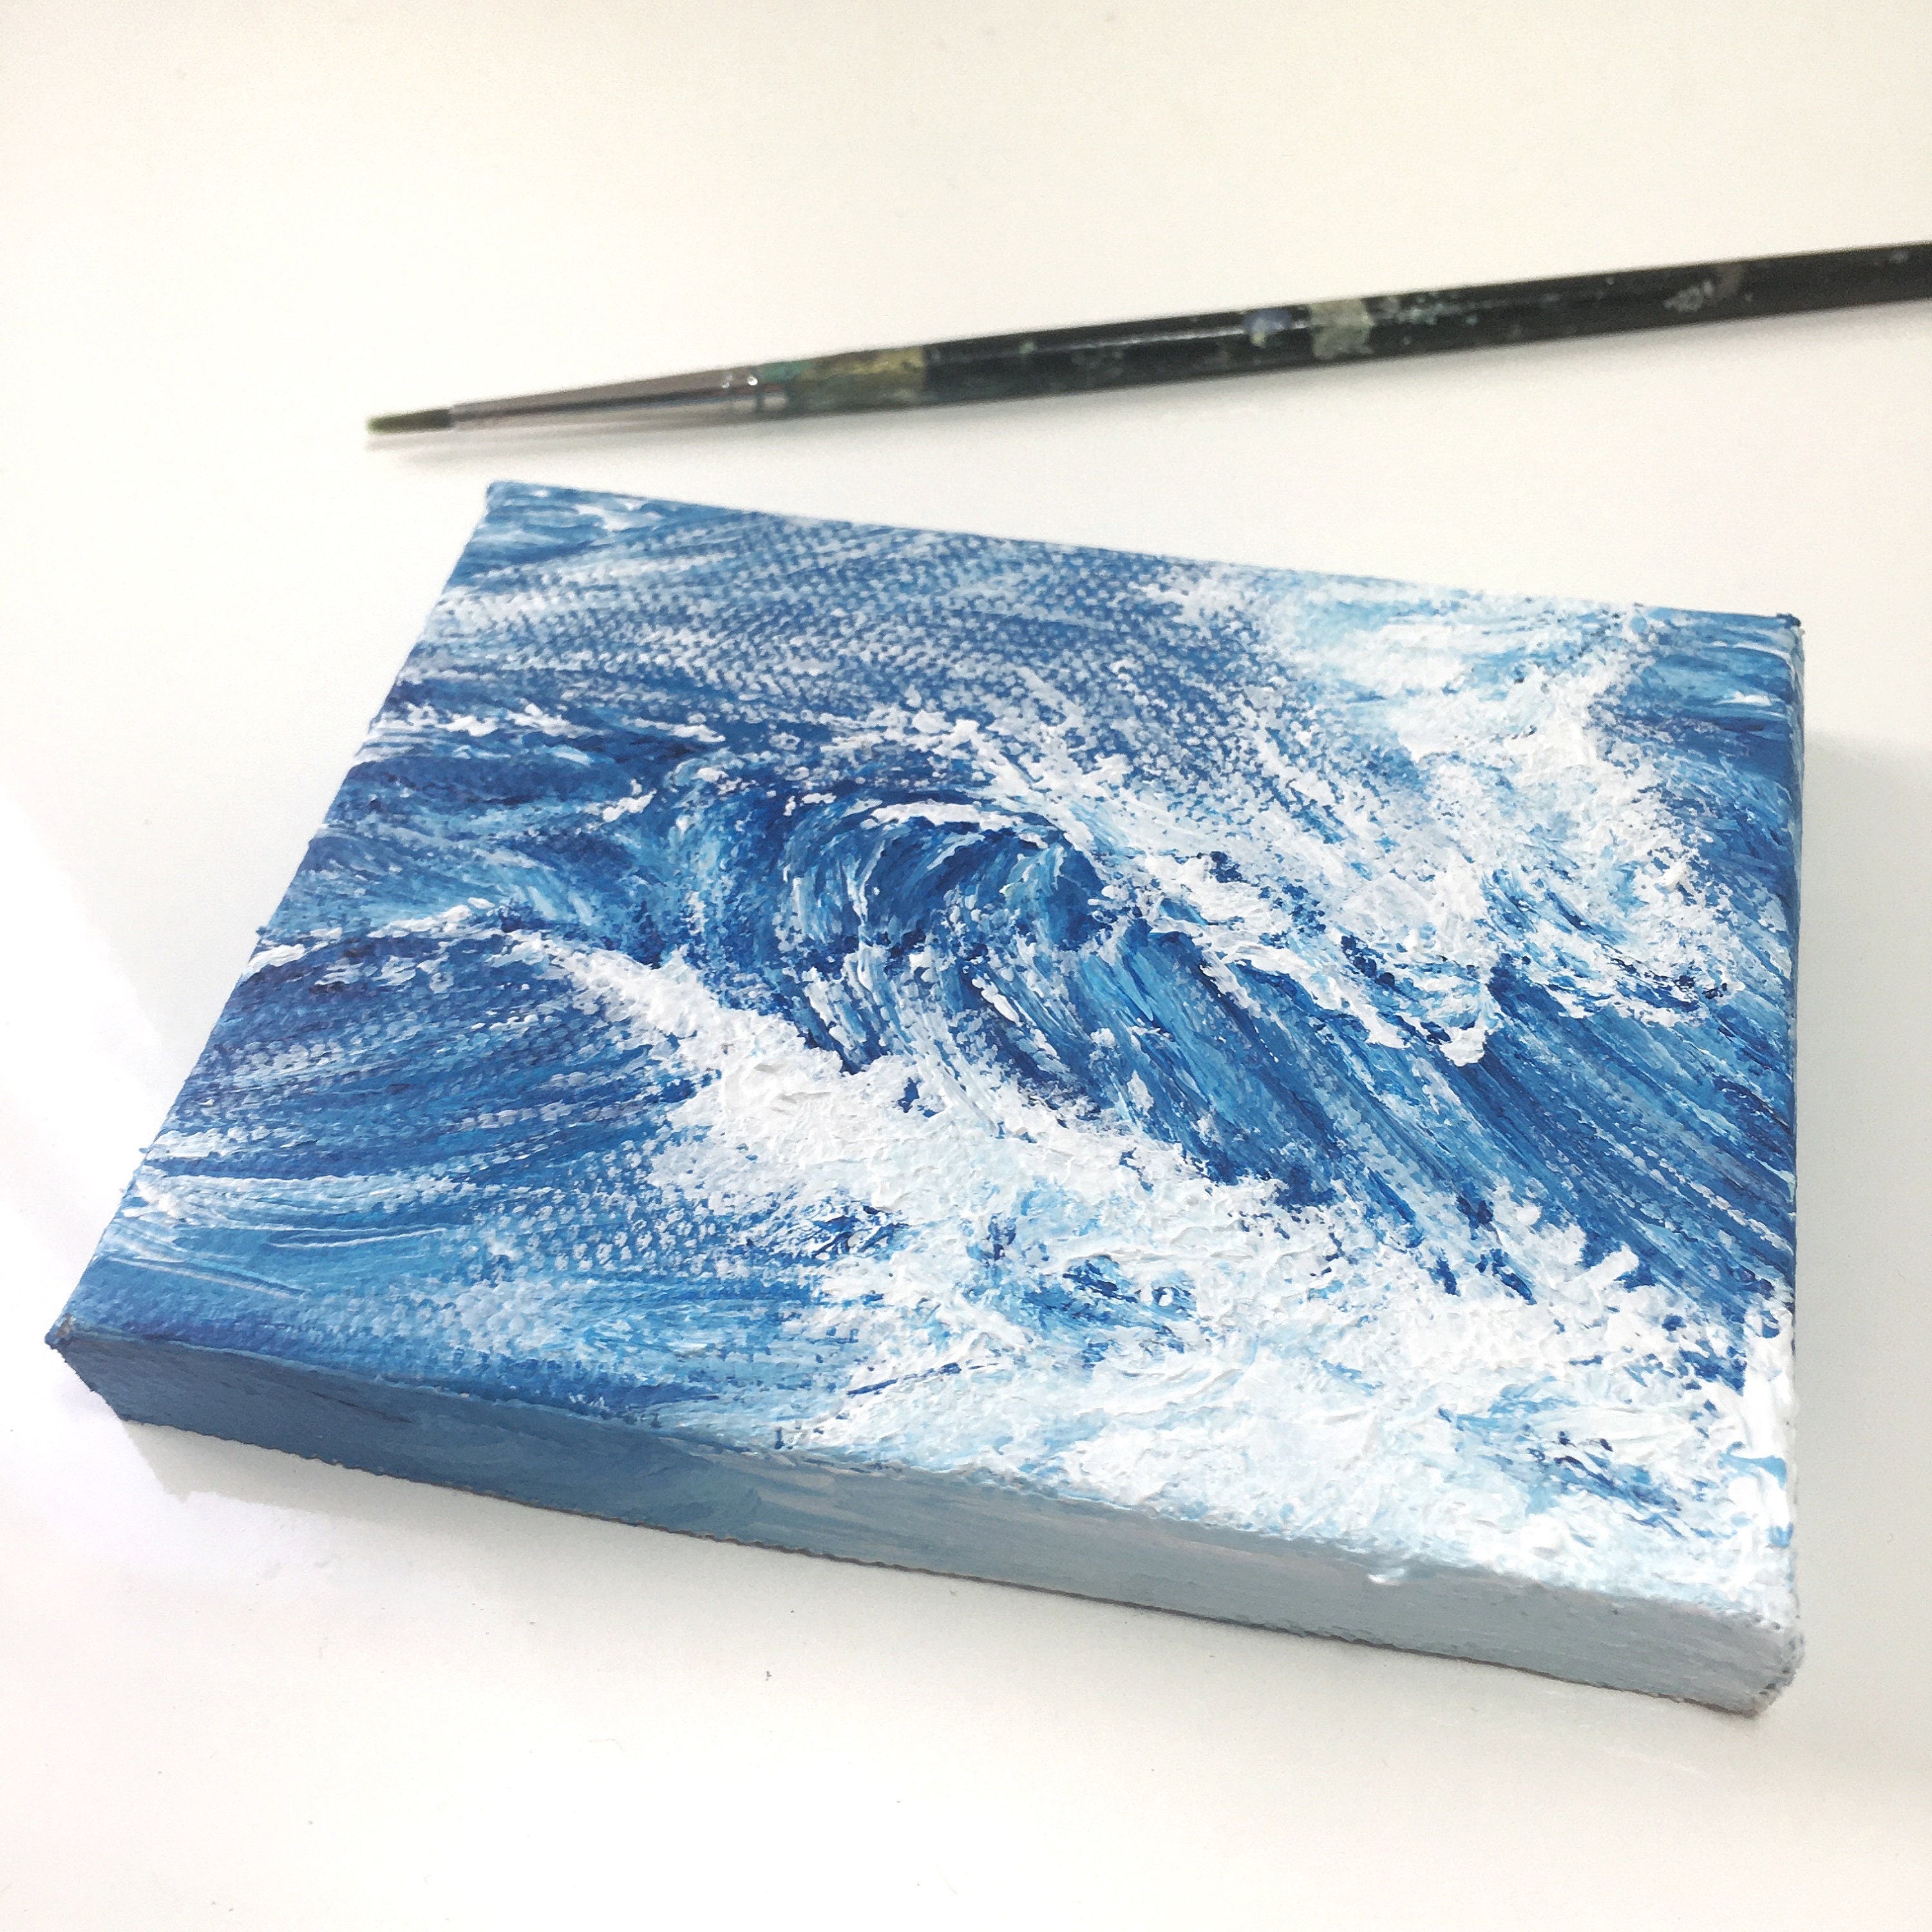 Ocean wave mini canvas painting 4×4 inches with mini easel